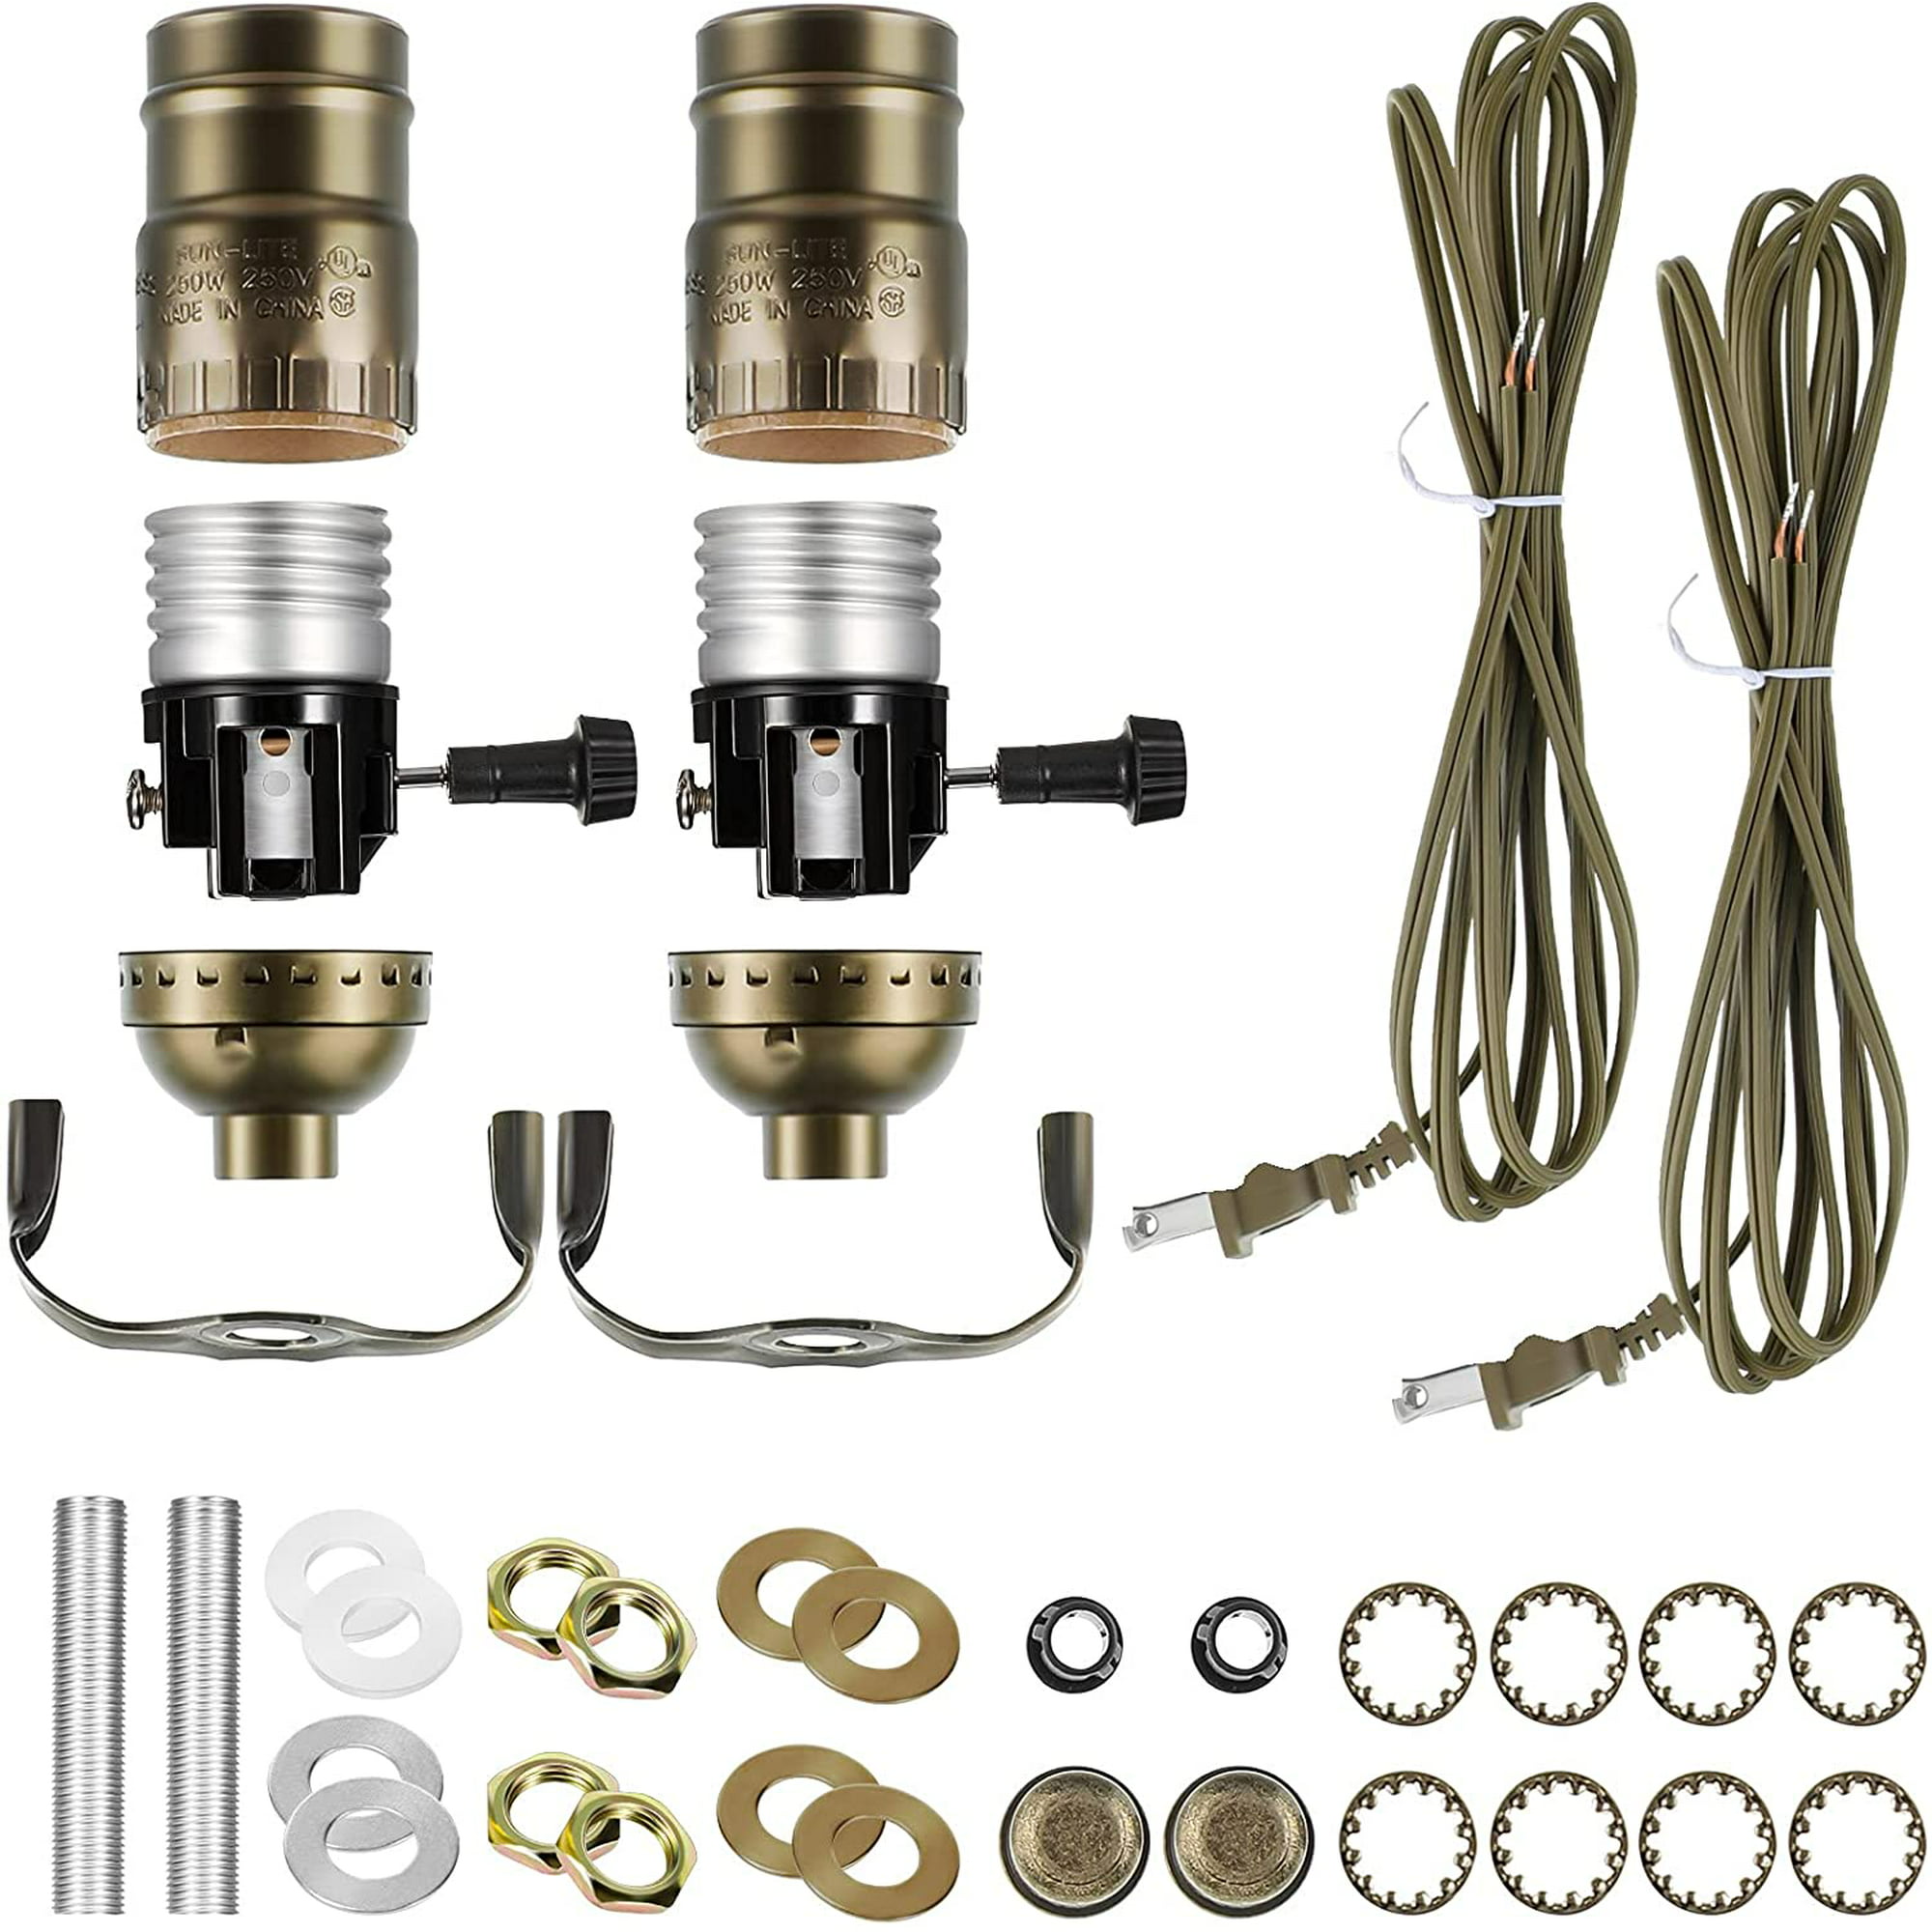 Table Lamp Wiring Kit With 12 Foot Cord, How To Tell If A Lamp Socket Is 3 Way Matching